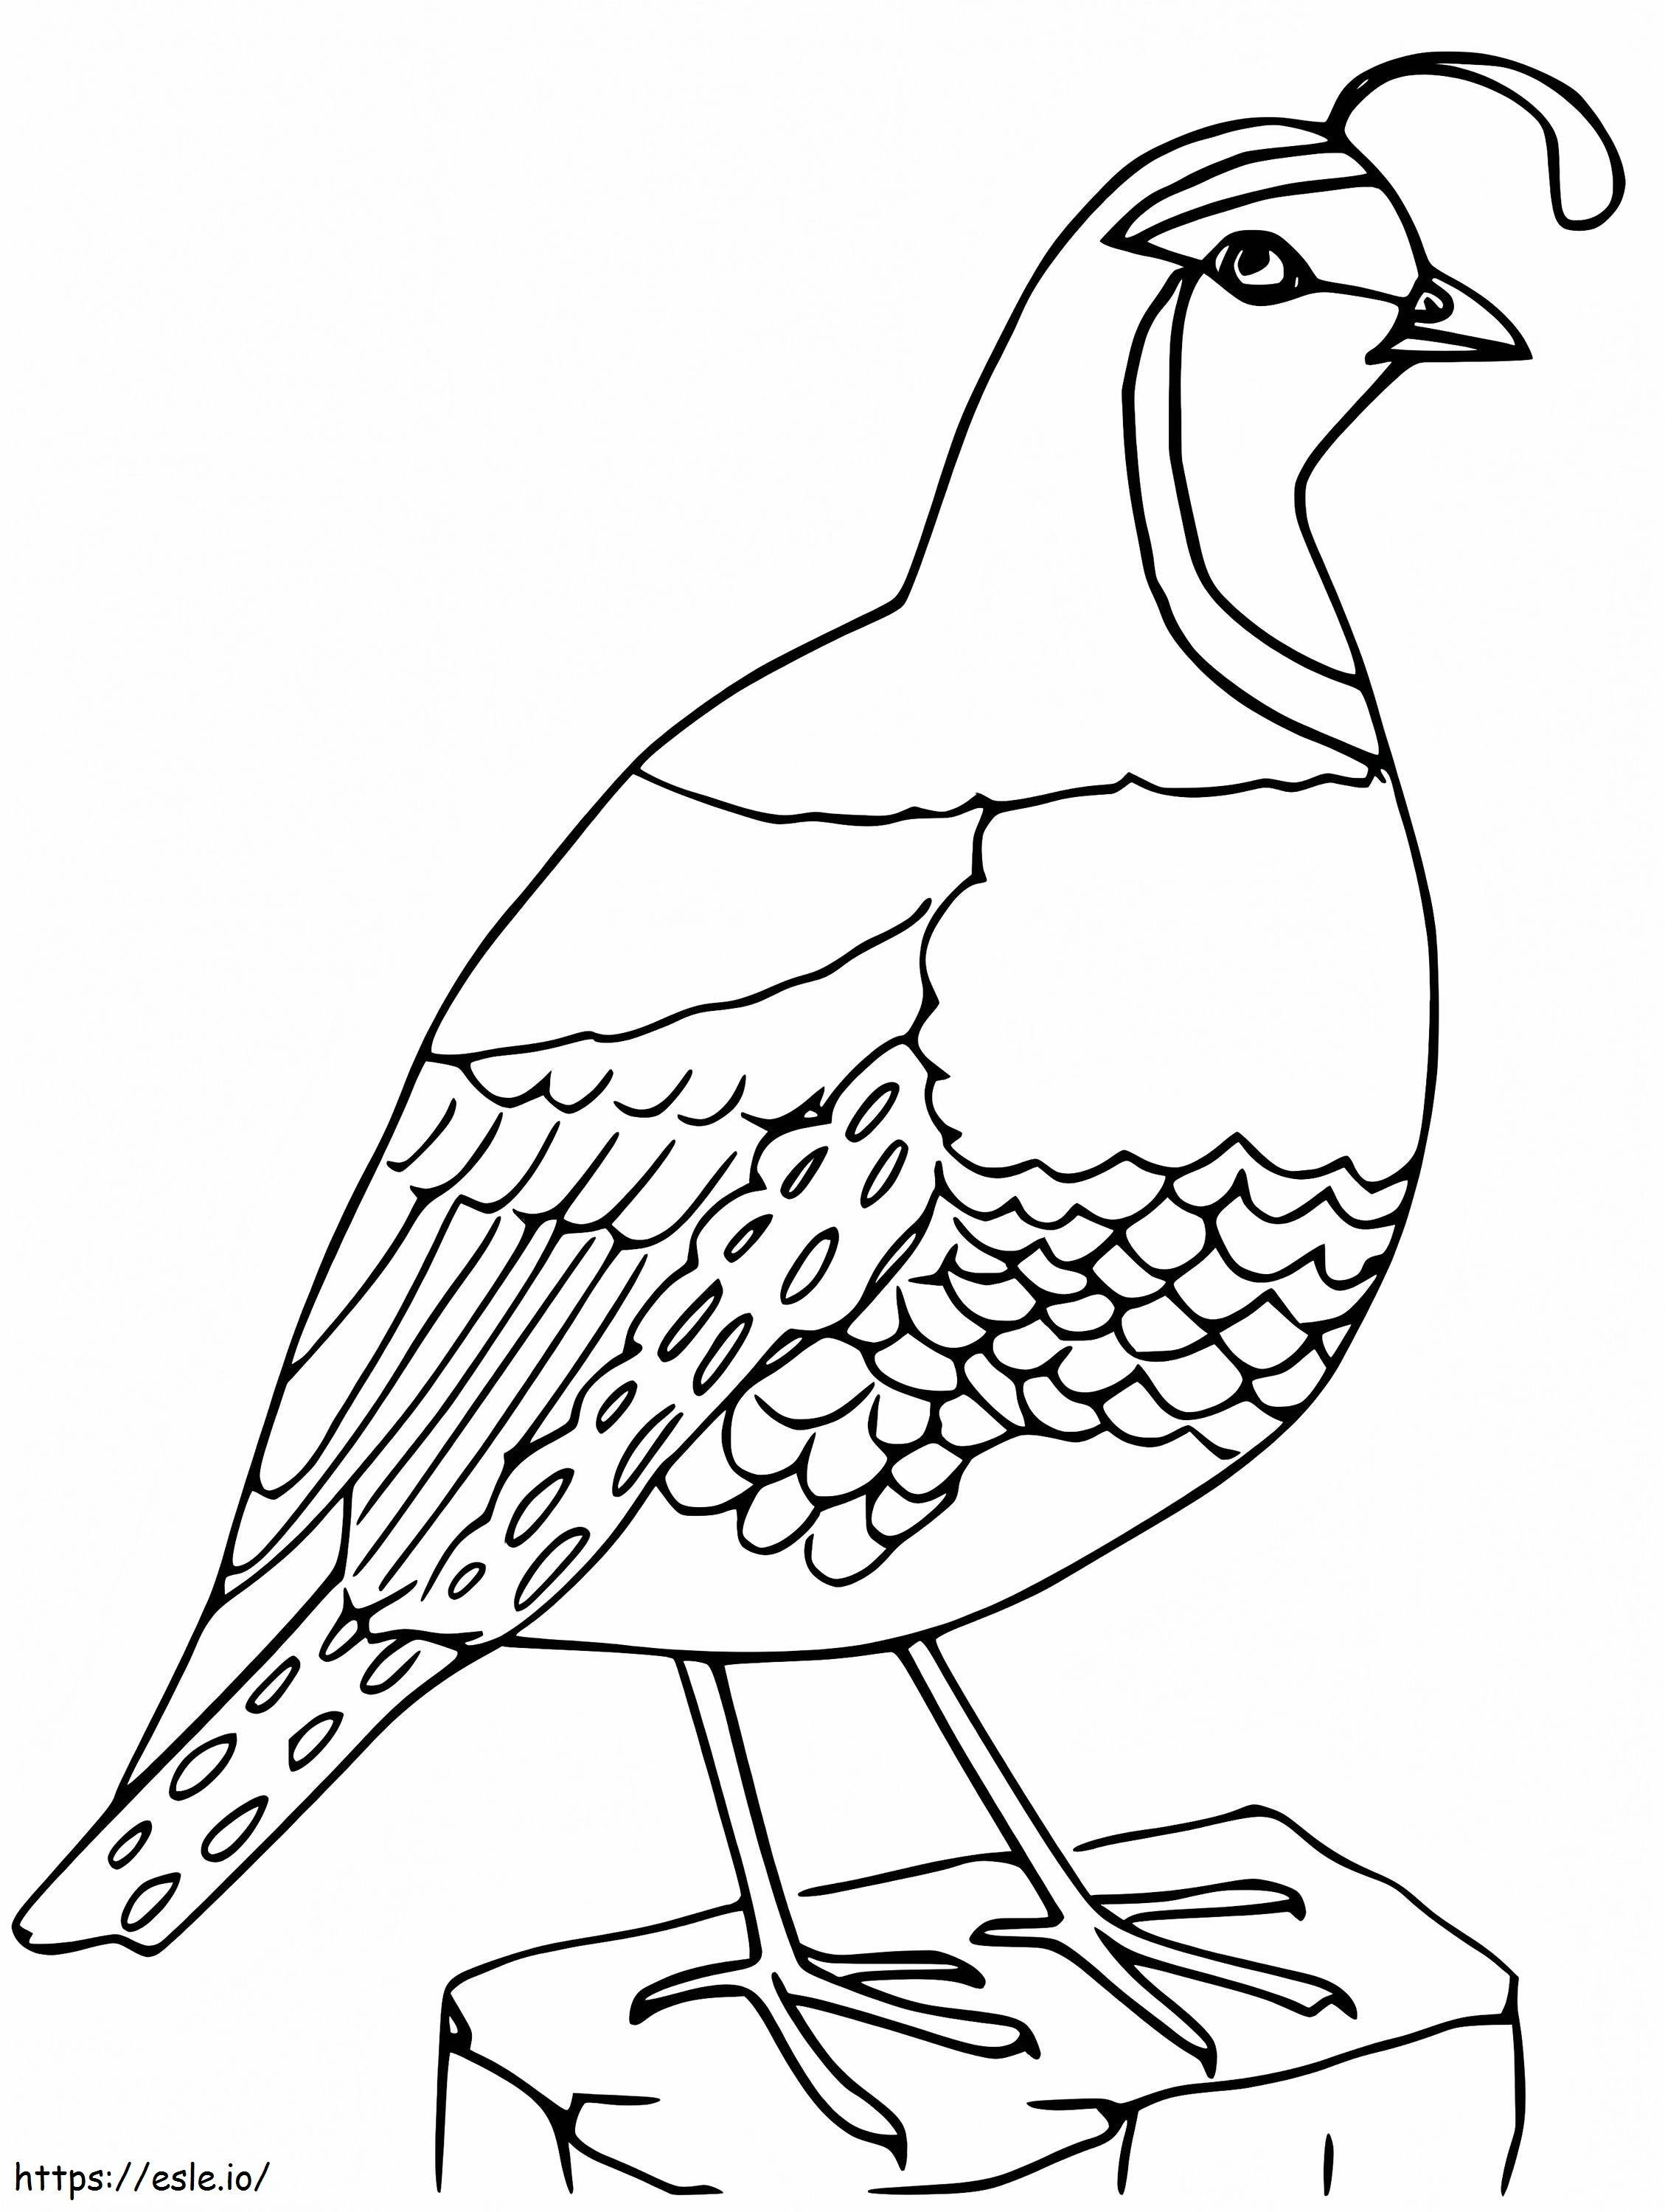 Quail 4 coloring page